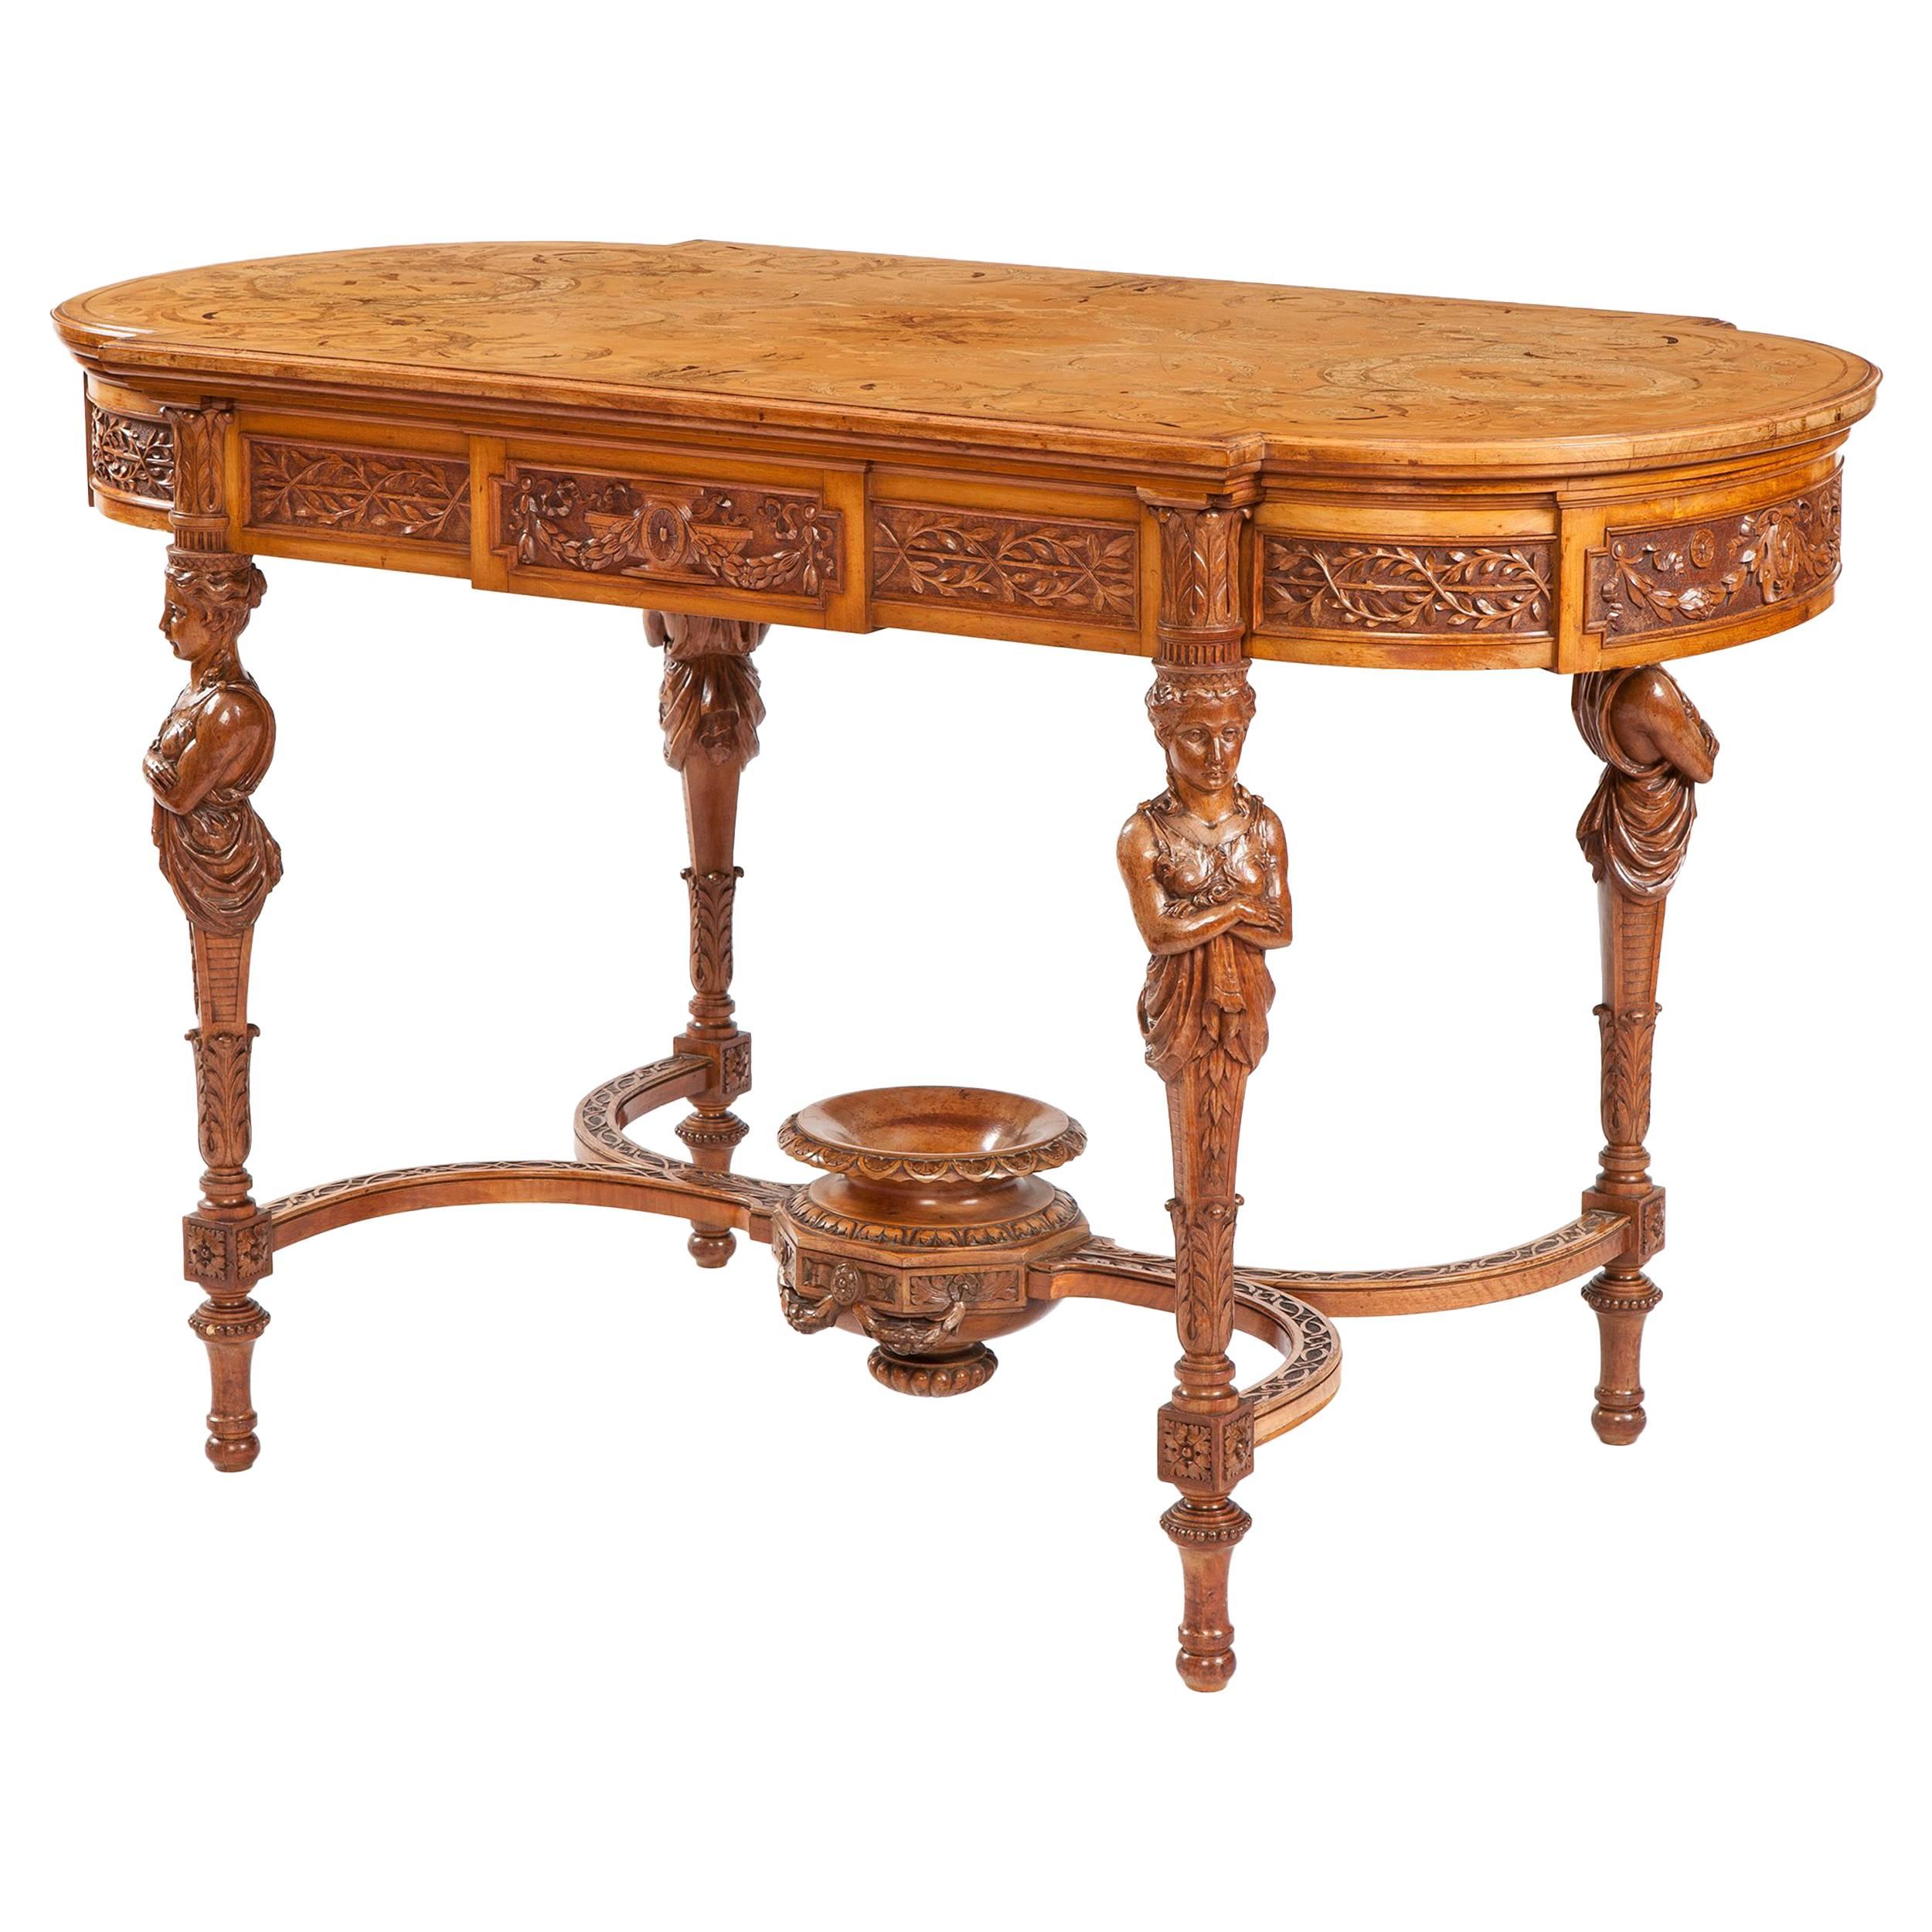 English Satinwood and Marquetry Centre Table by James Plucknett of Warwick